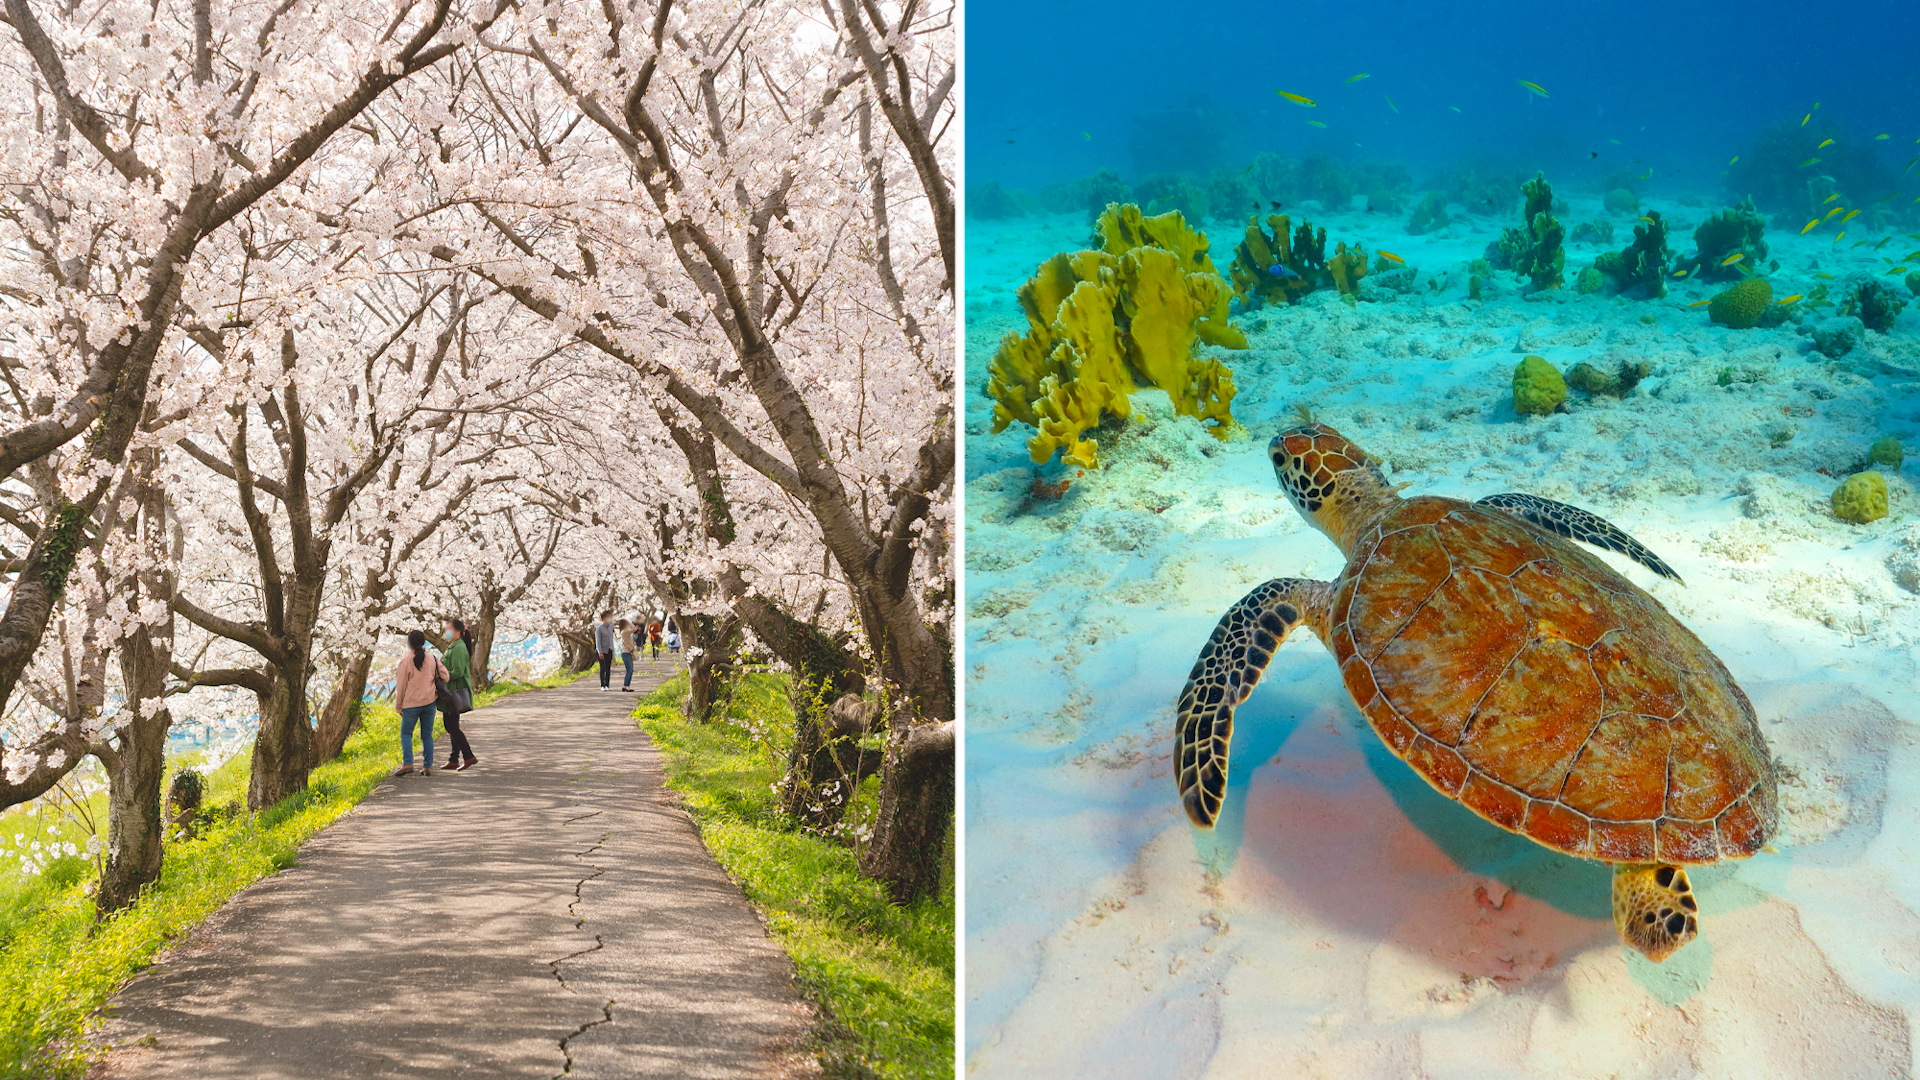 A split image. The left-hand image shows Someiyoshino cherry blossoms in full bloom. The right-hand images shows a sea turtle in Tobago. 